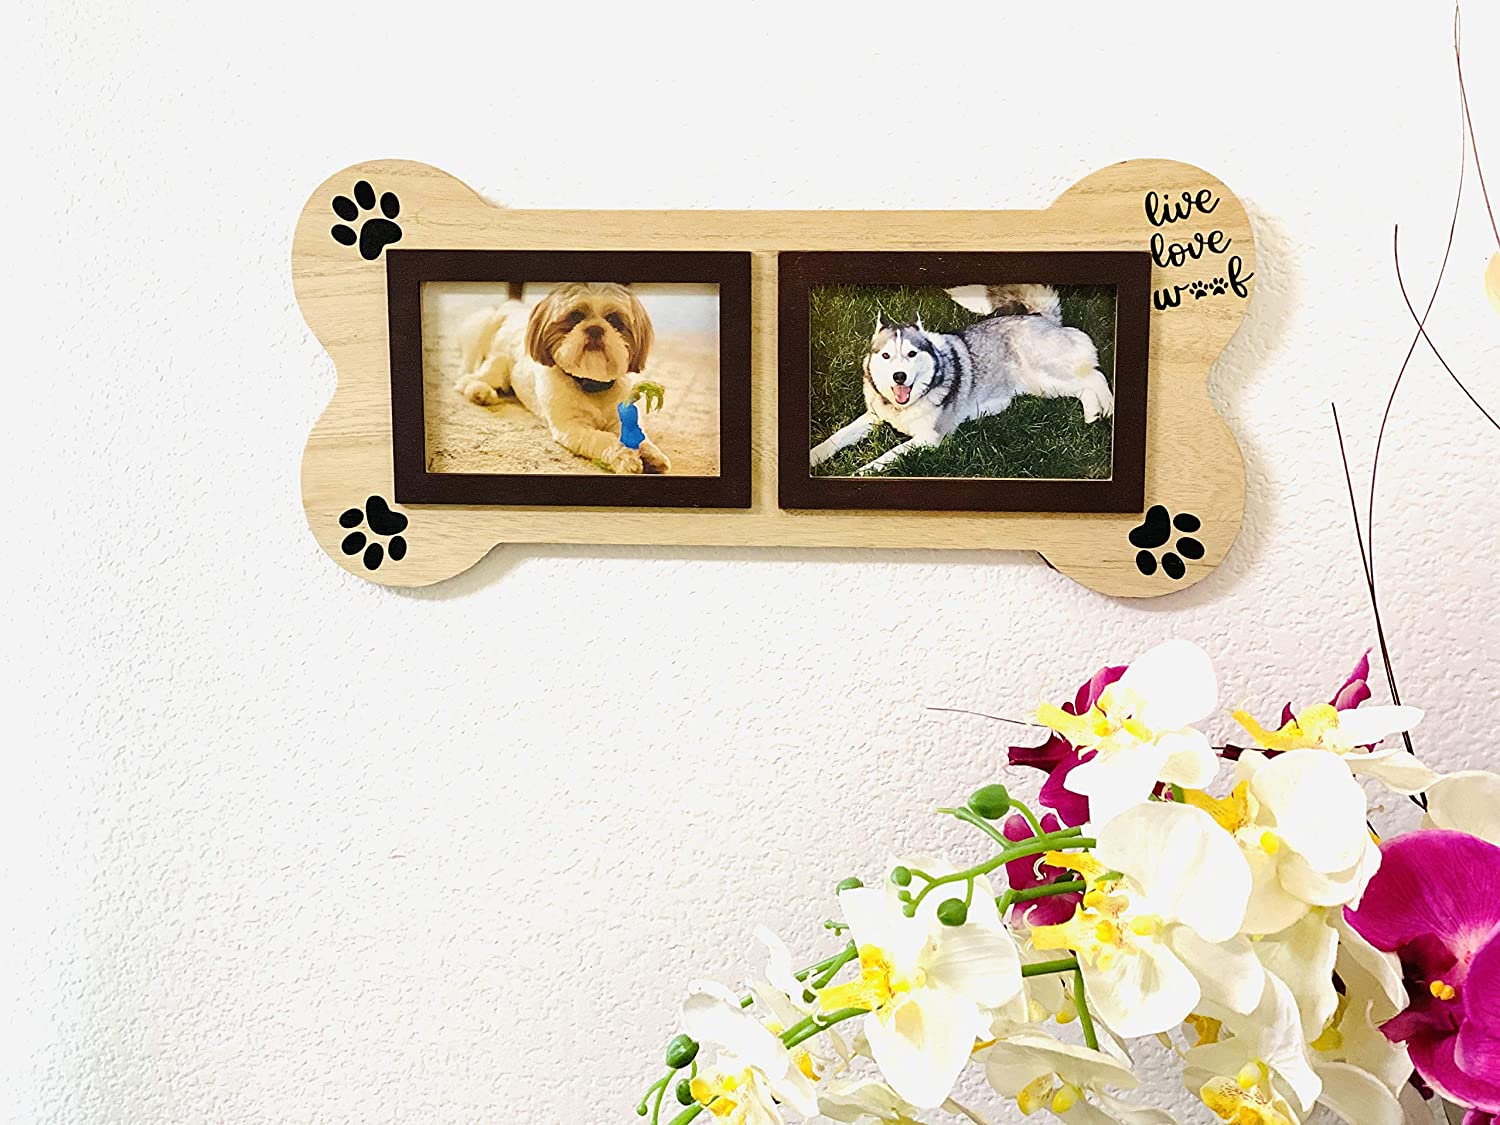 Dog Picture Frame Live Love Woof Pet Memorial Gifts for Dogs. Brown Dog Bone Shaped Wooden Picture Frames Collage 4x6. - image 2 of 3